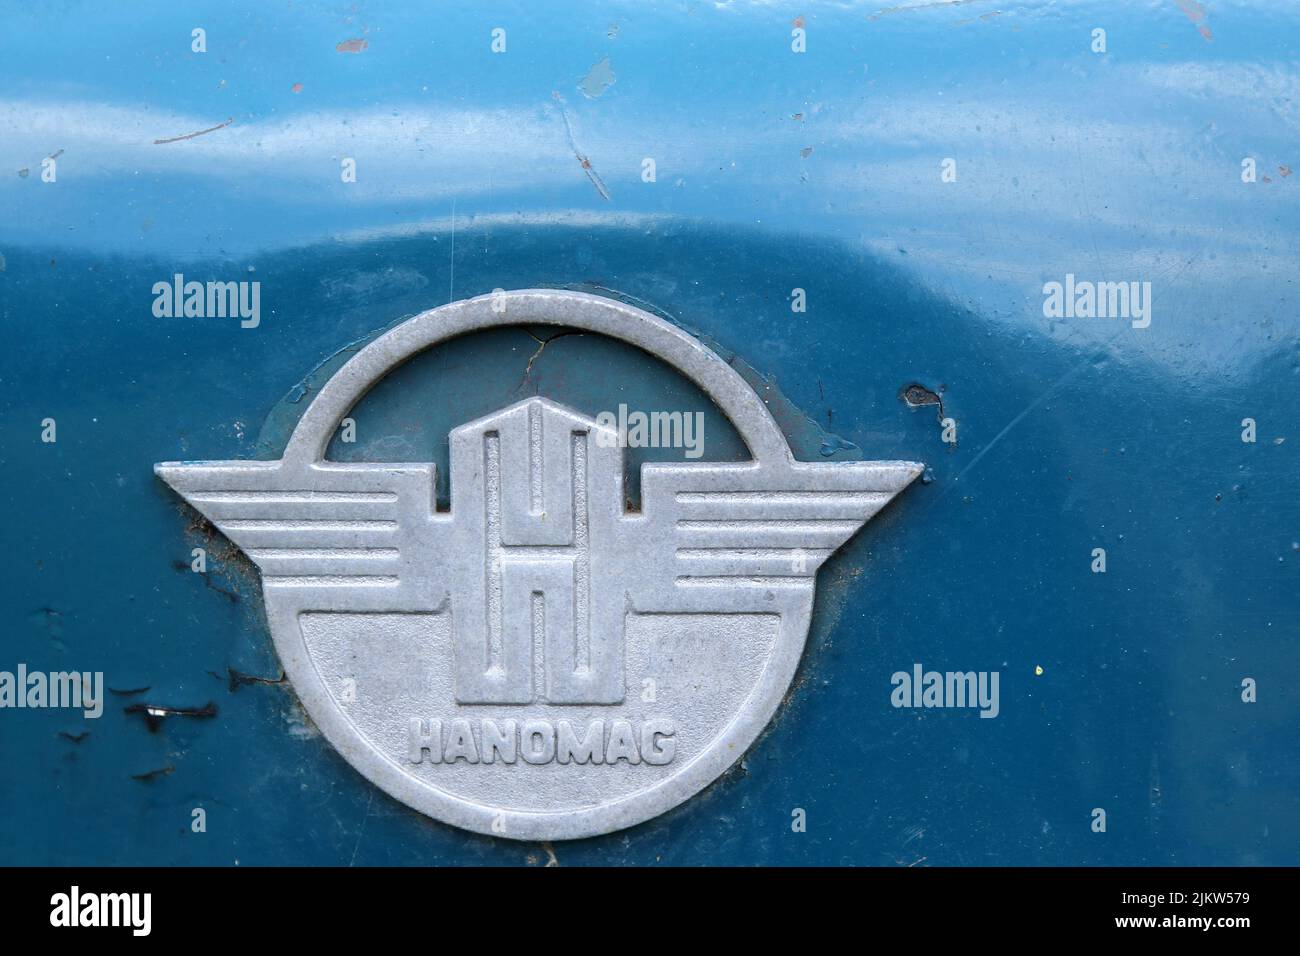 Hanomag was a German agricultural machinery manufacturer from Hanoverit sits on a blue sheet of a tartor and is a close up shot Stock Photo